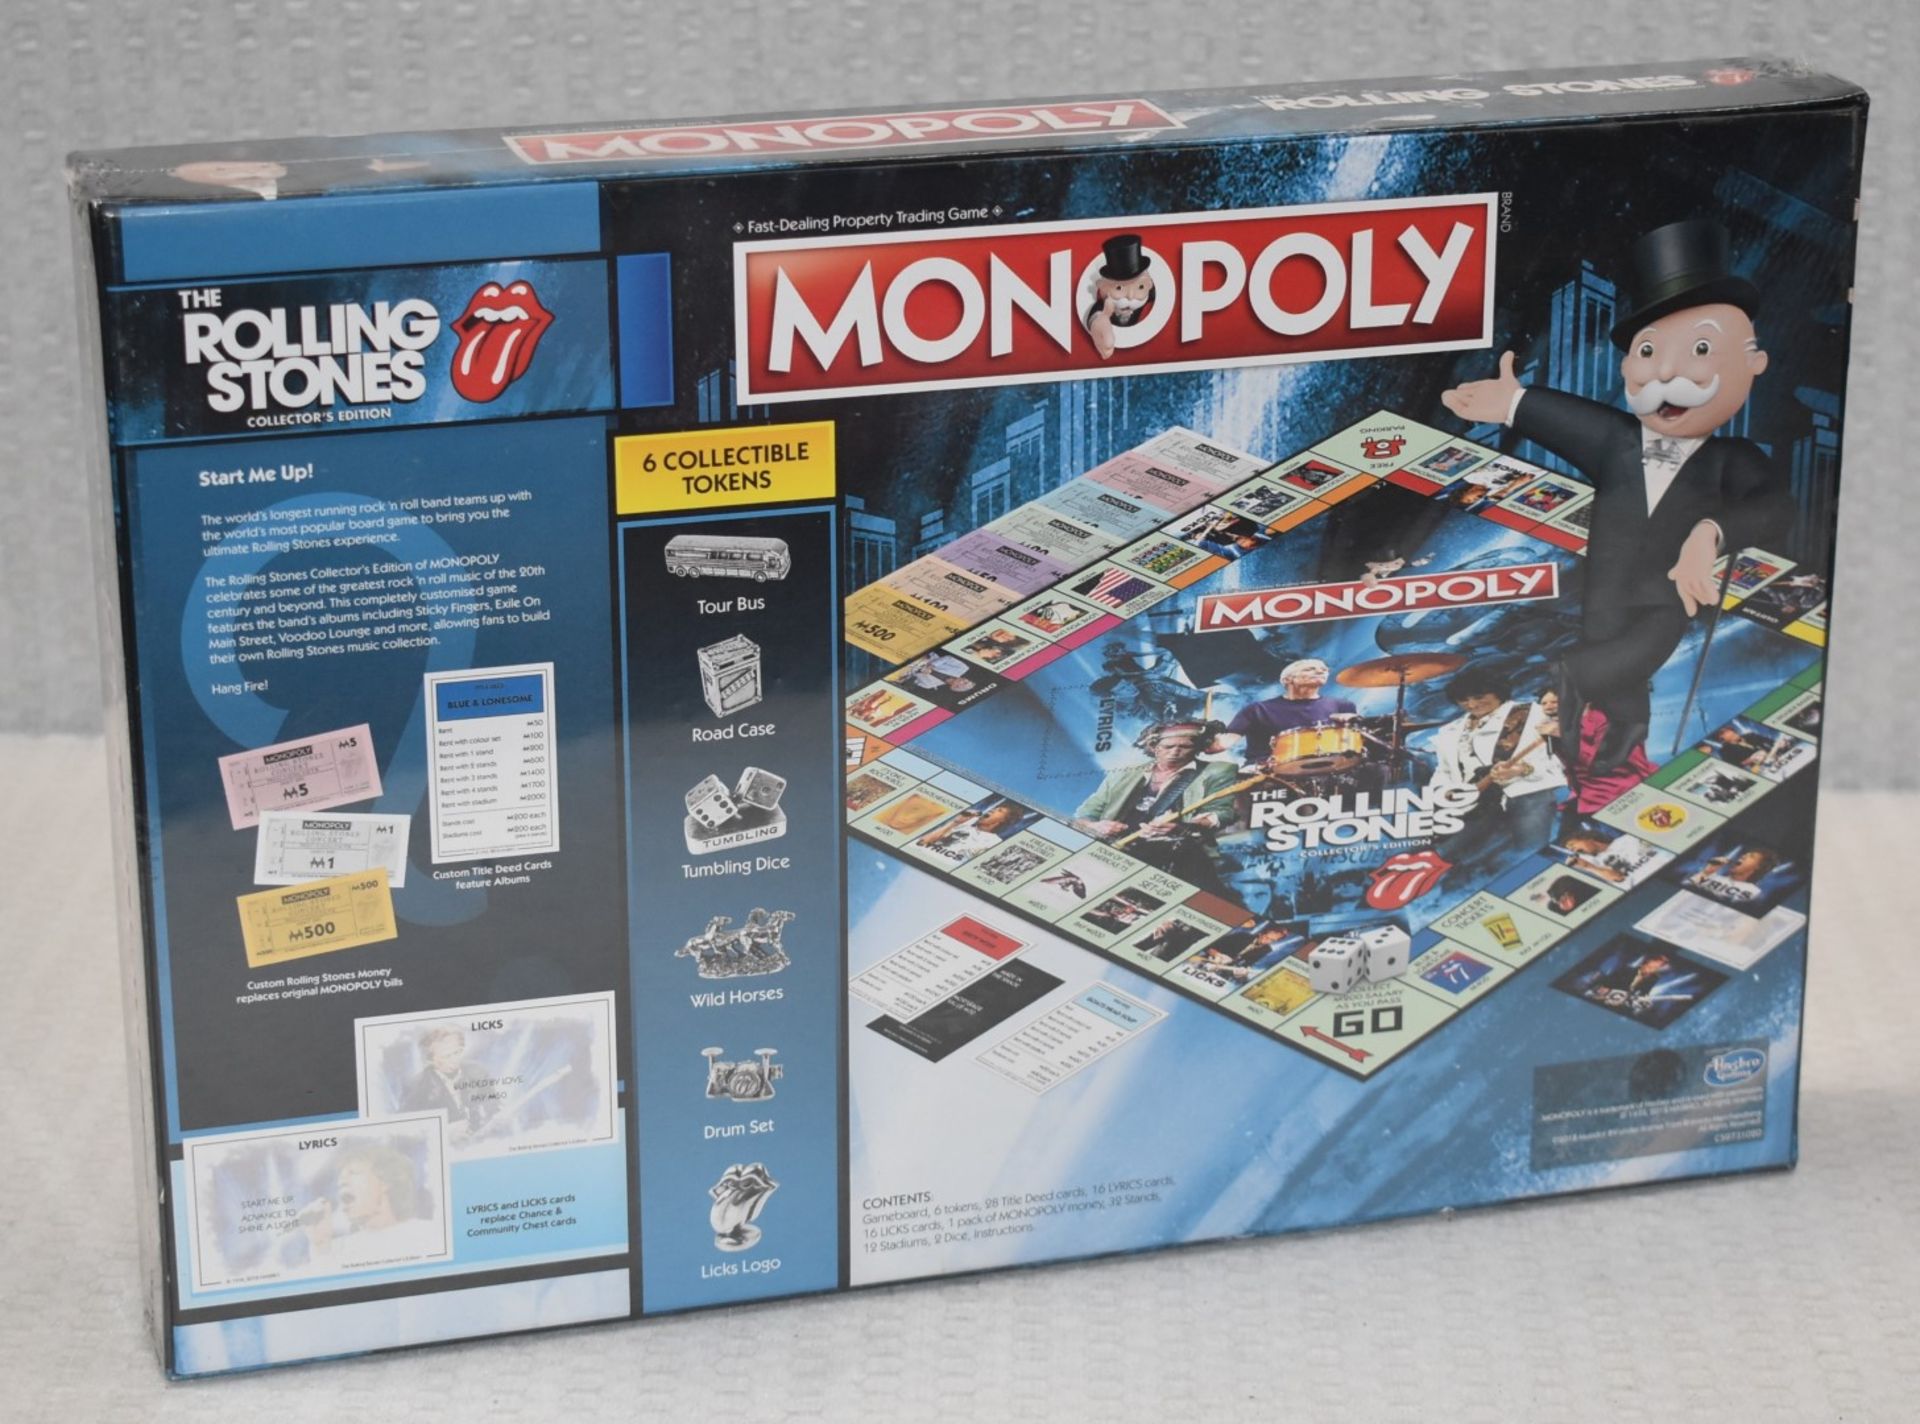 1 x MONOPOLY Collectors Edition ROLLING STONES Board Game - New and Sealed - CL720 - Ref: CA - - Image 3 of 3